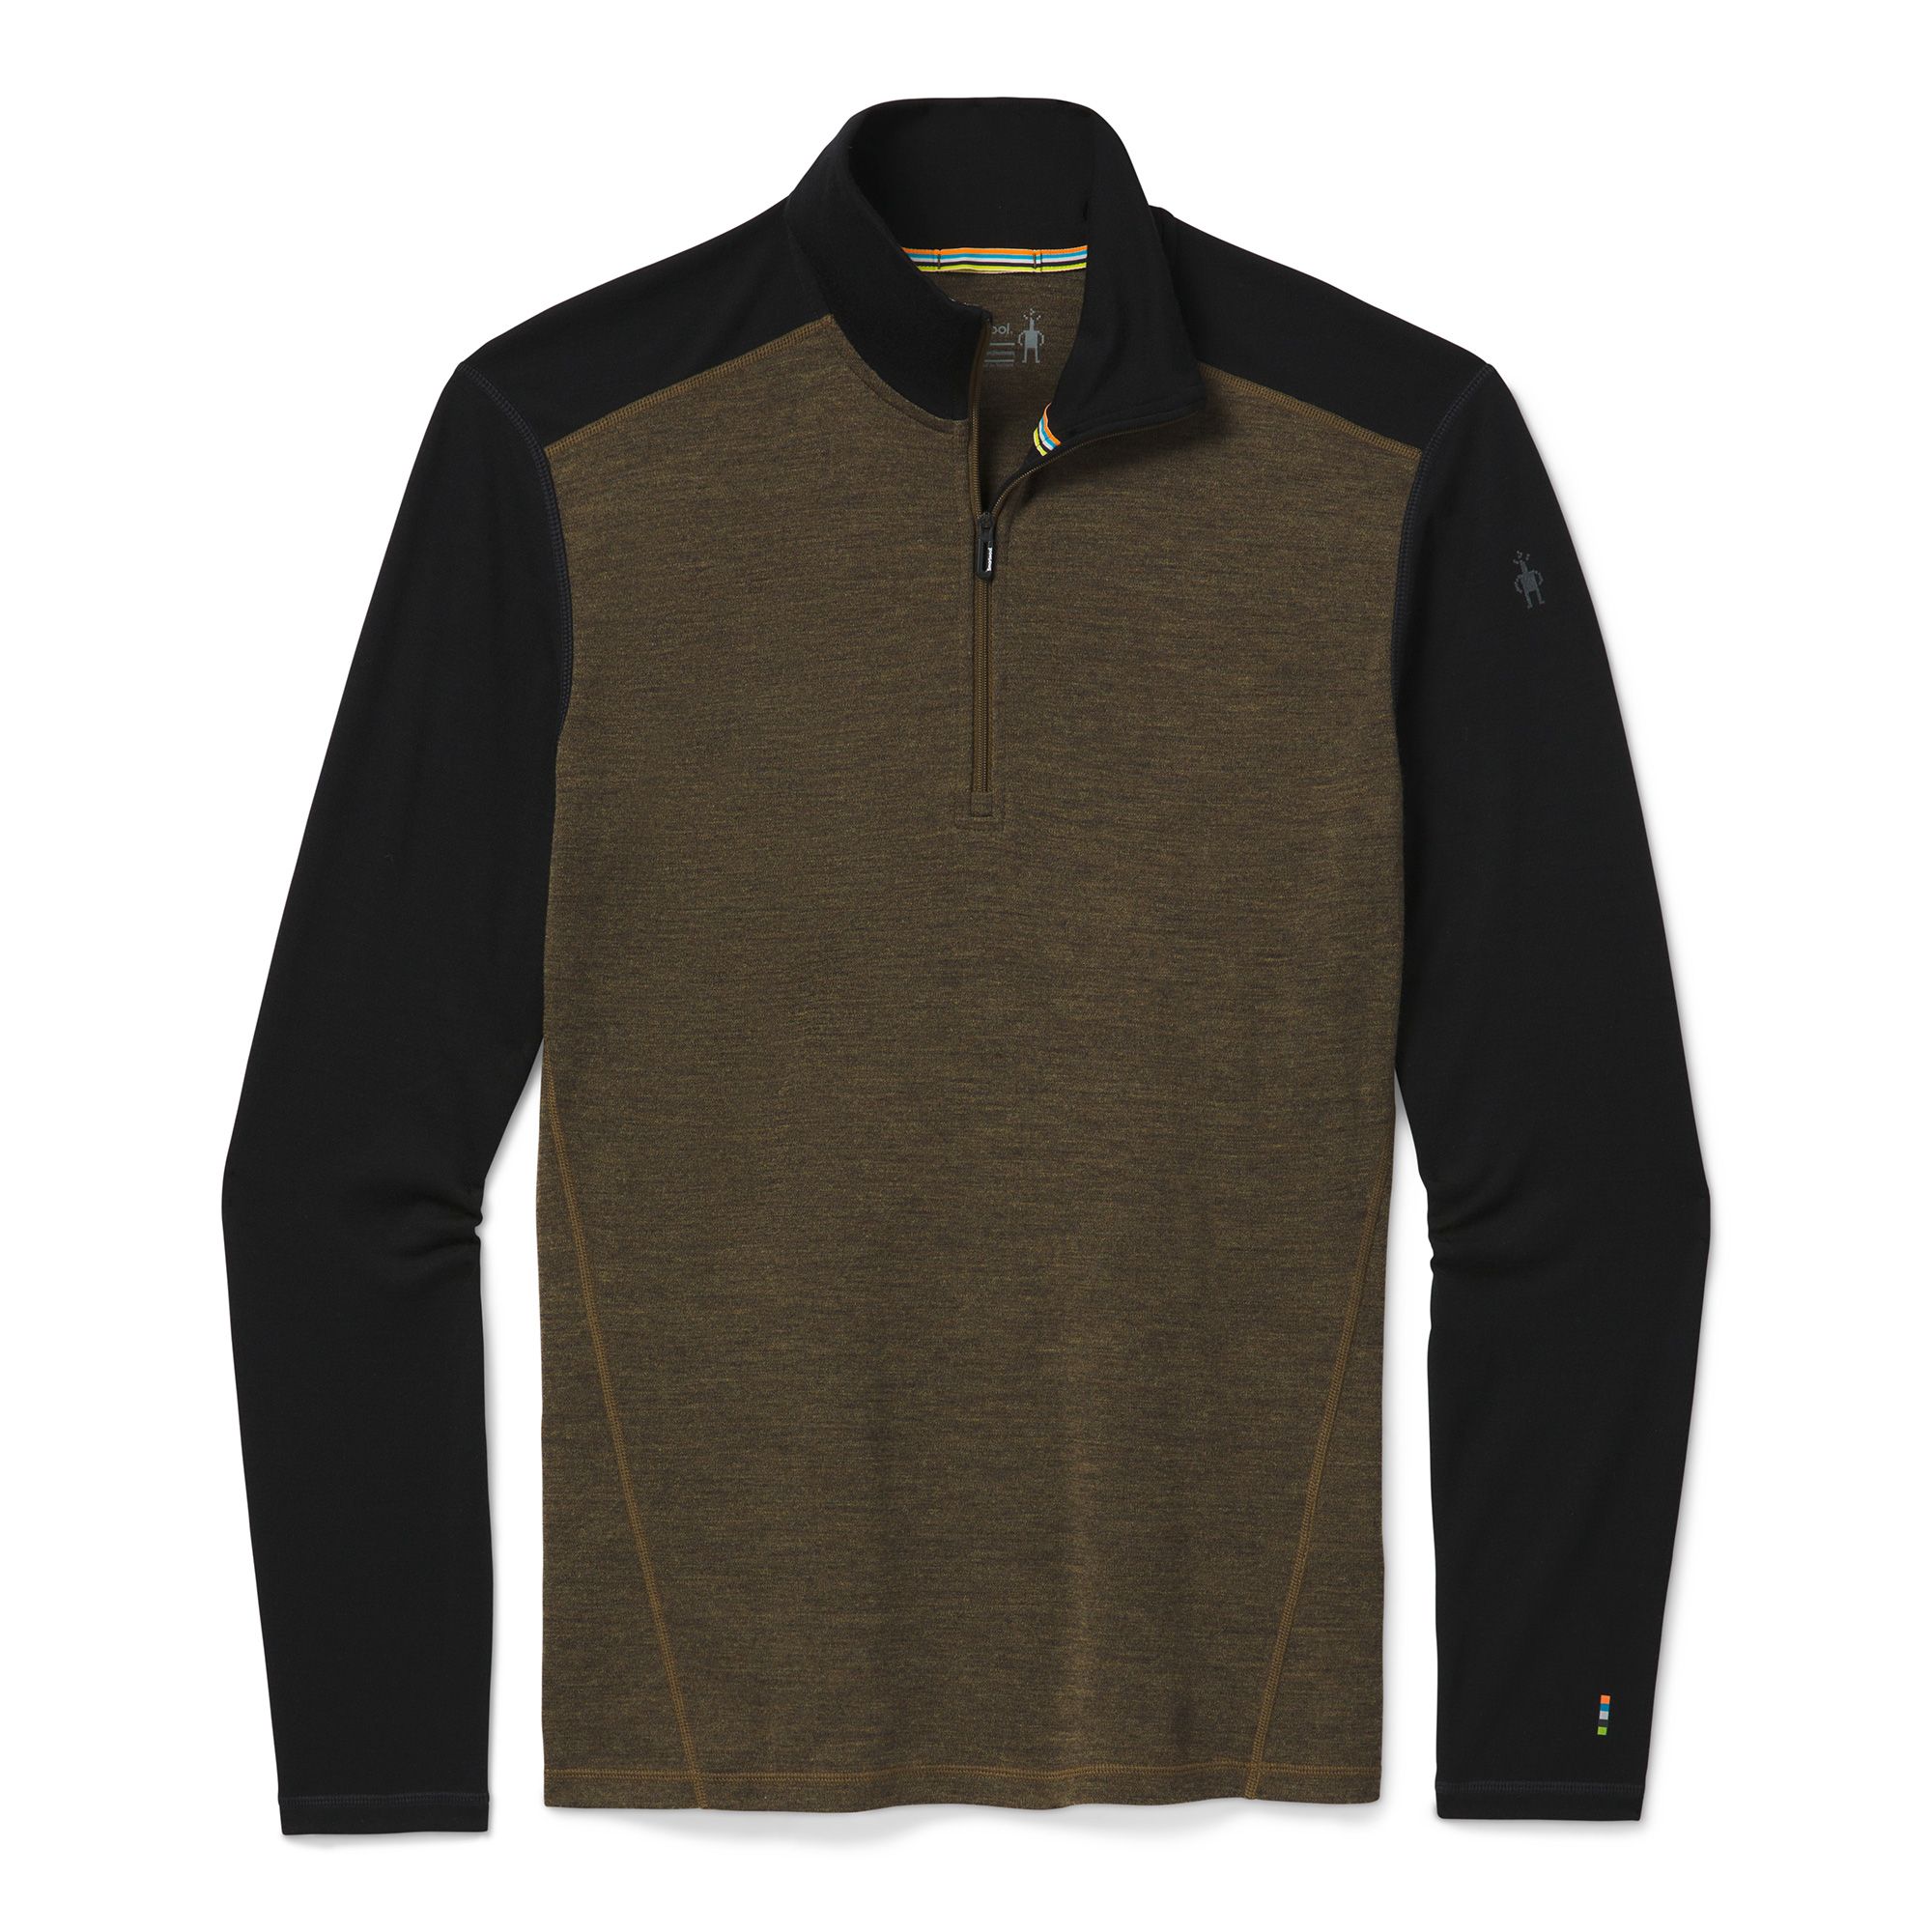 Smartwool SW000752545L Men's Merino 150 Baselayer 1/4 Zip Light Gray  Heather L : : Clothing, Shoes & Accessories